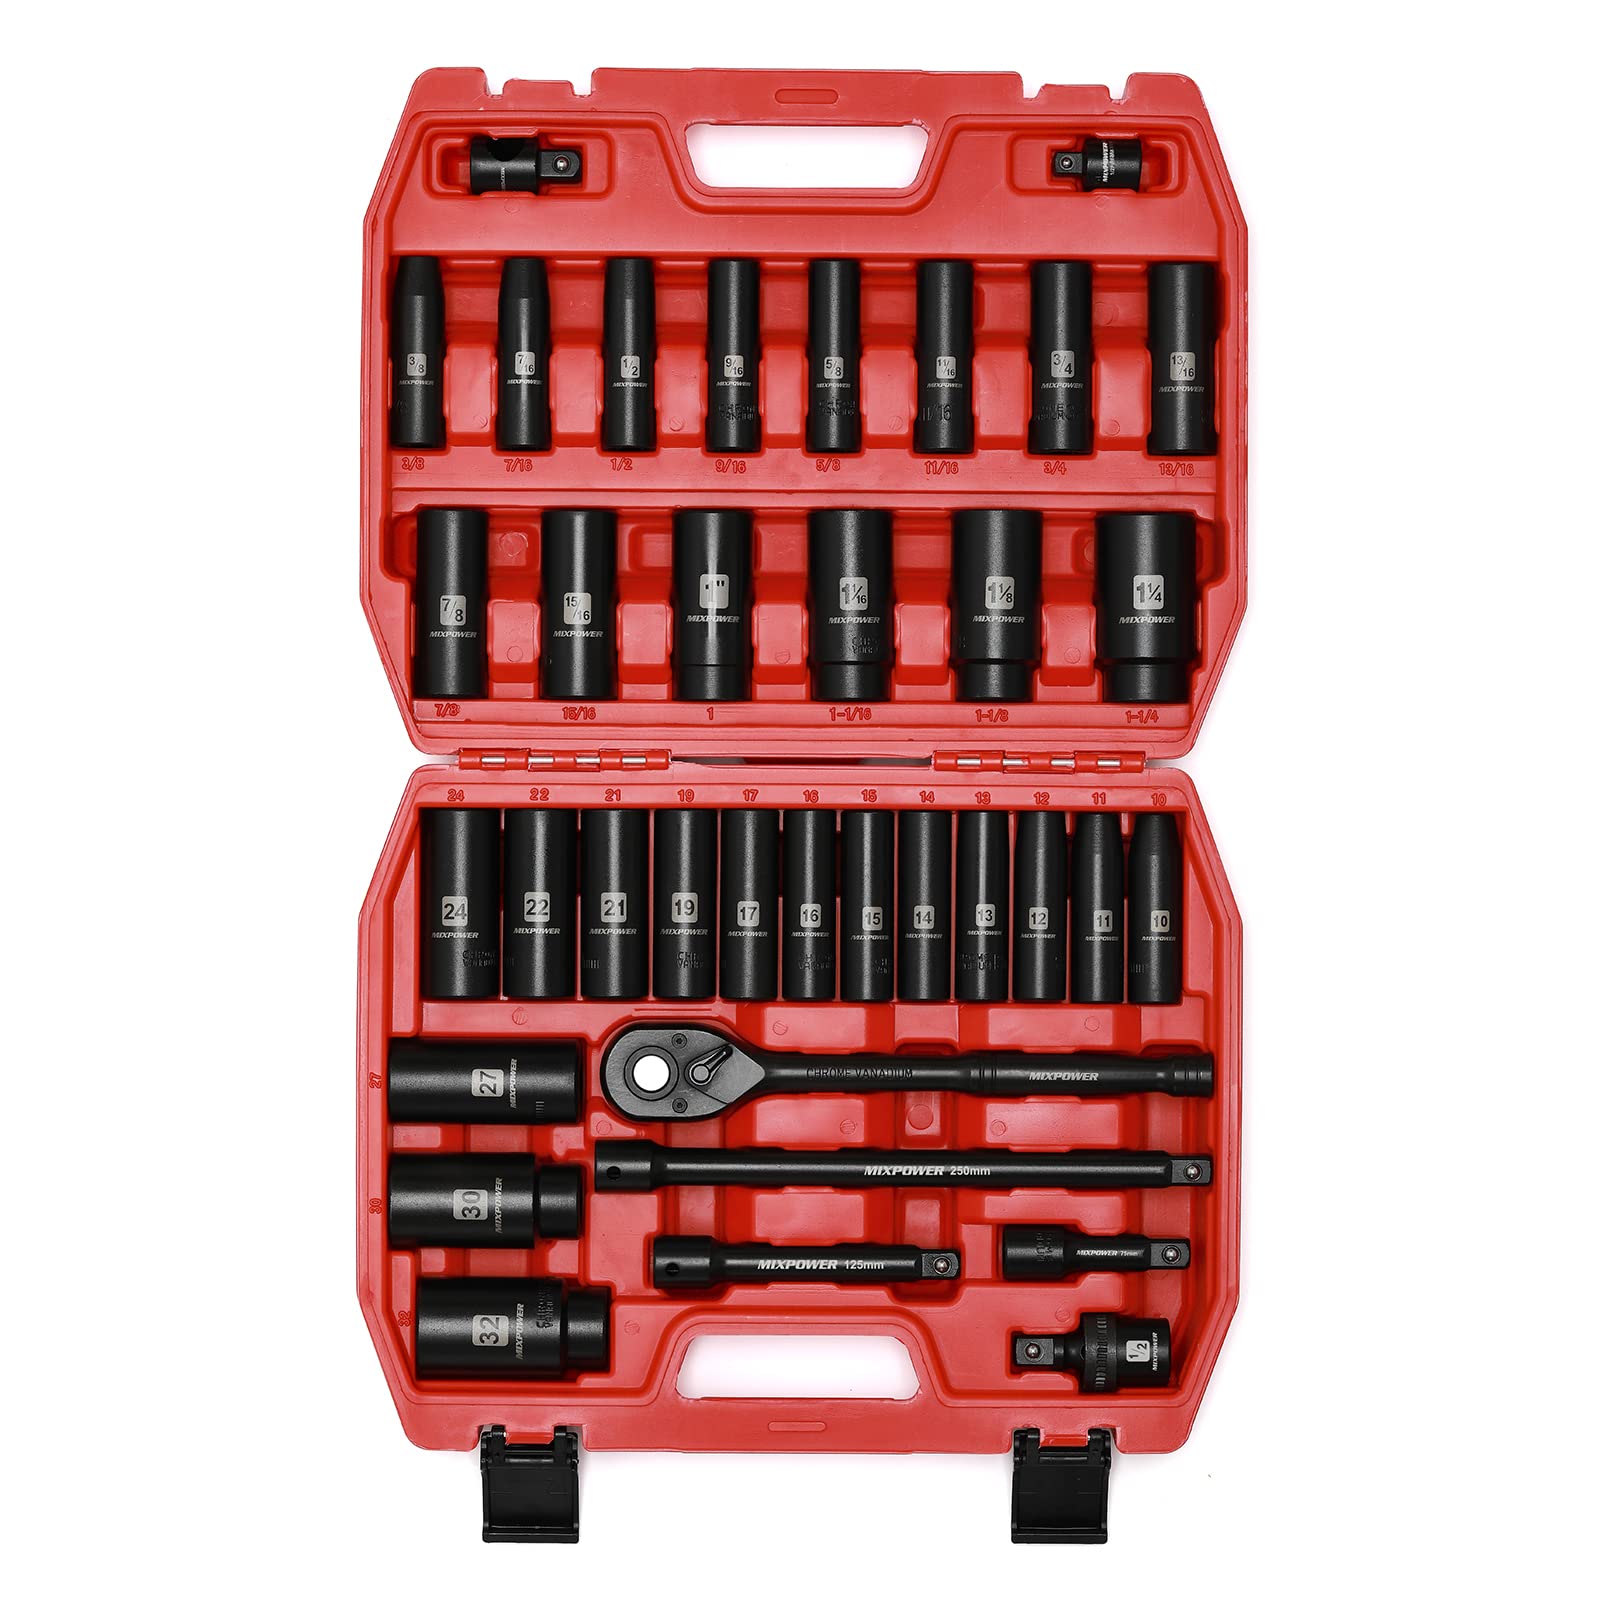 MIXPOWER 36-Piece 1/2-Inch Drive Deep Impact Socket Master Set with 10-inch Quick-release Ratchet Handle & Accessories, 3/8" - 1-1/4", 10-32MM, Deep, SAE&Metric, CR-V Steel